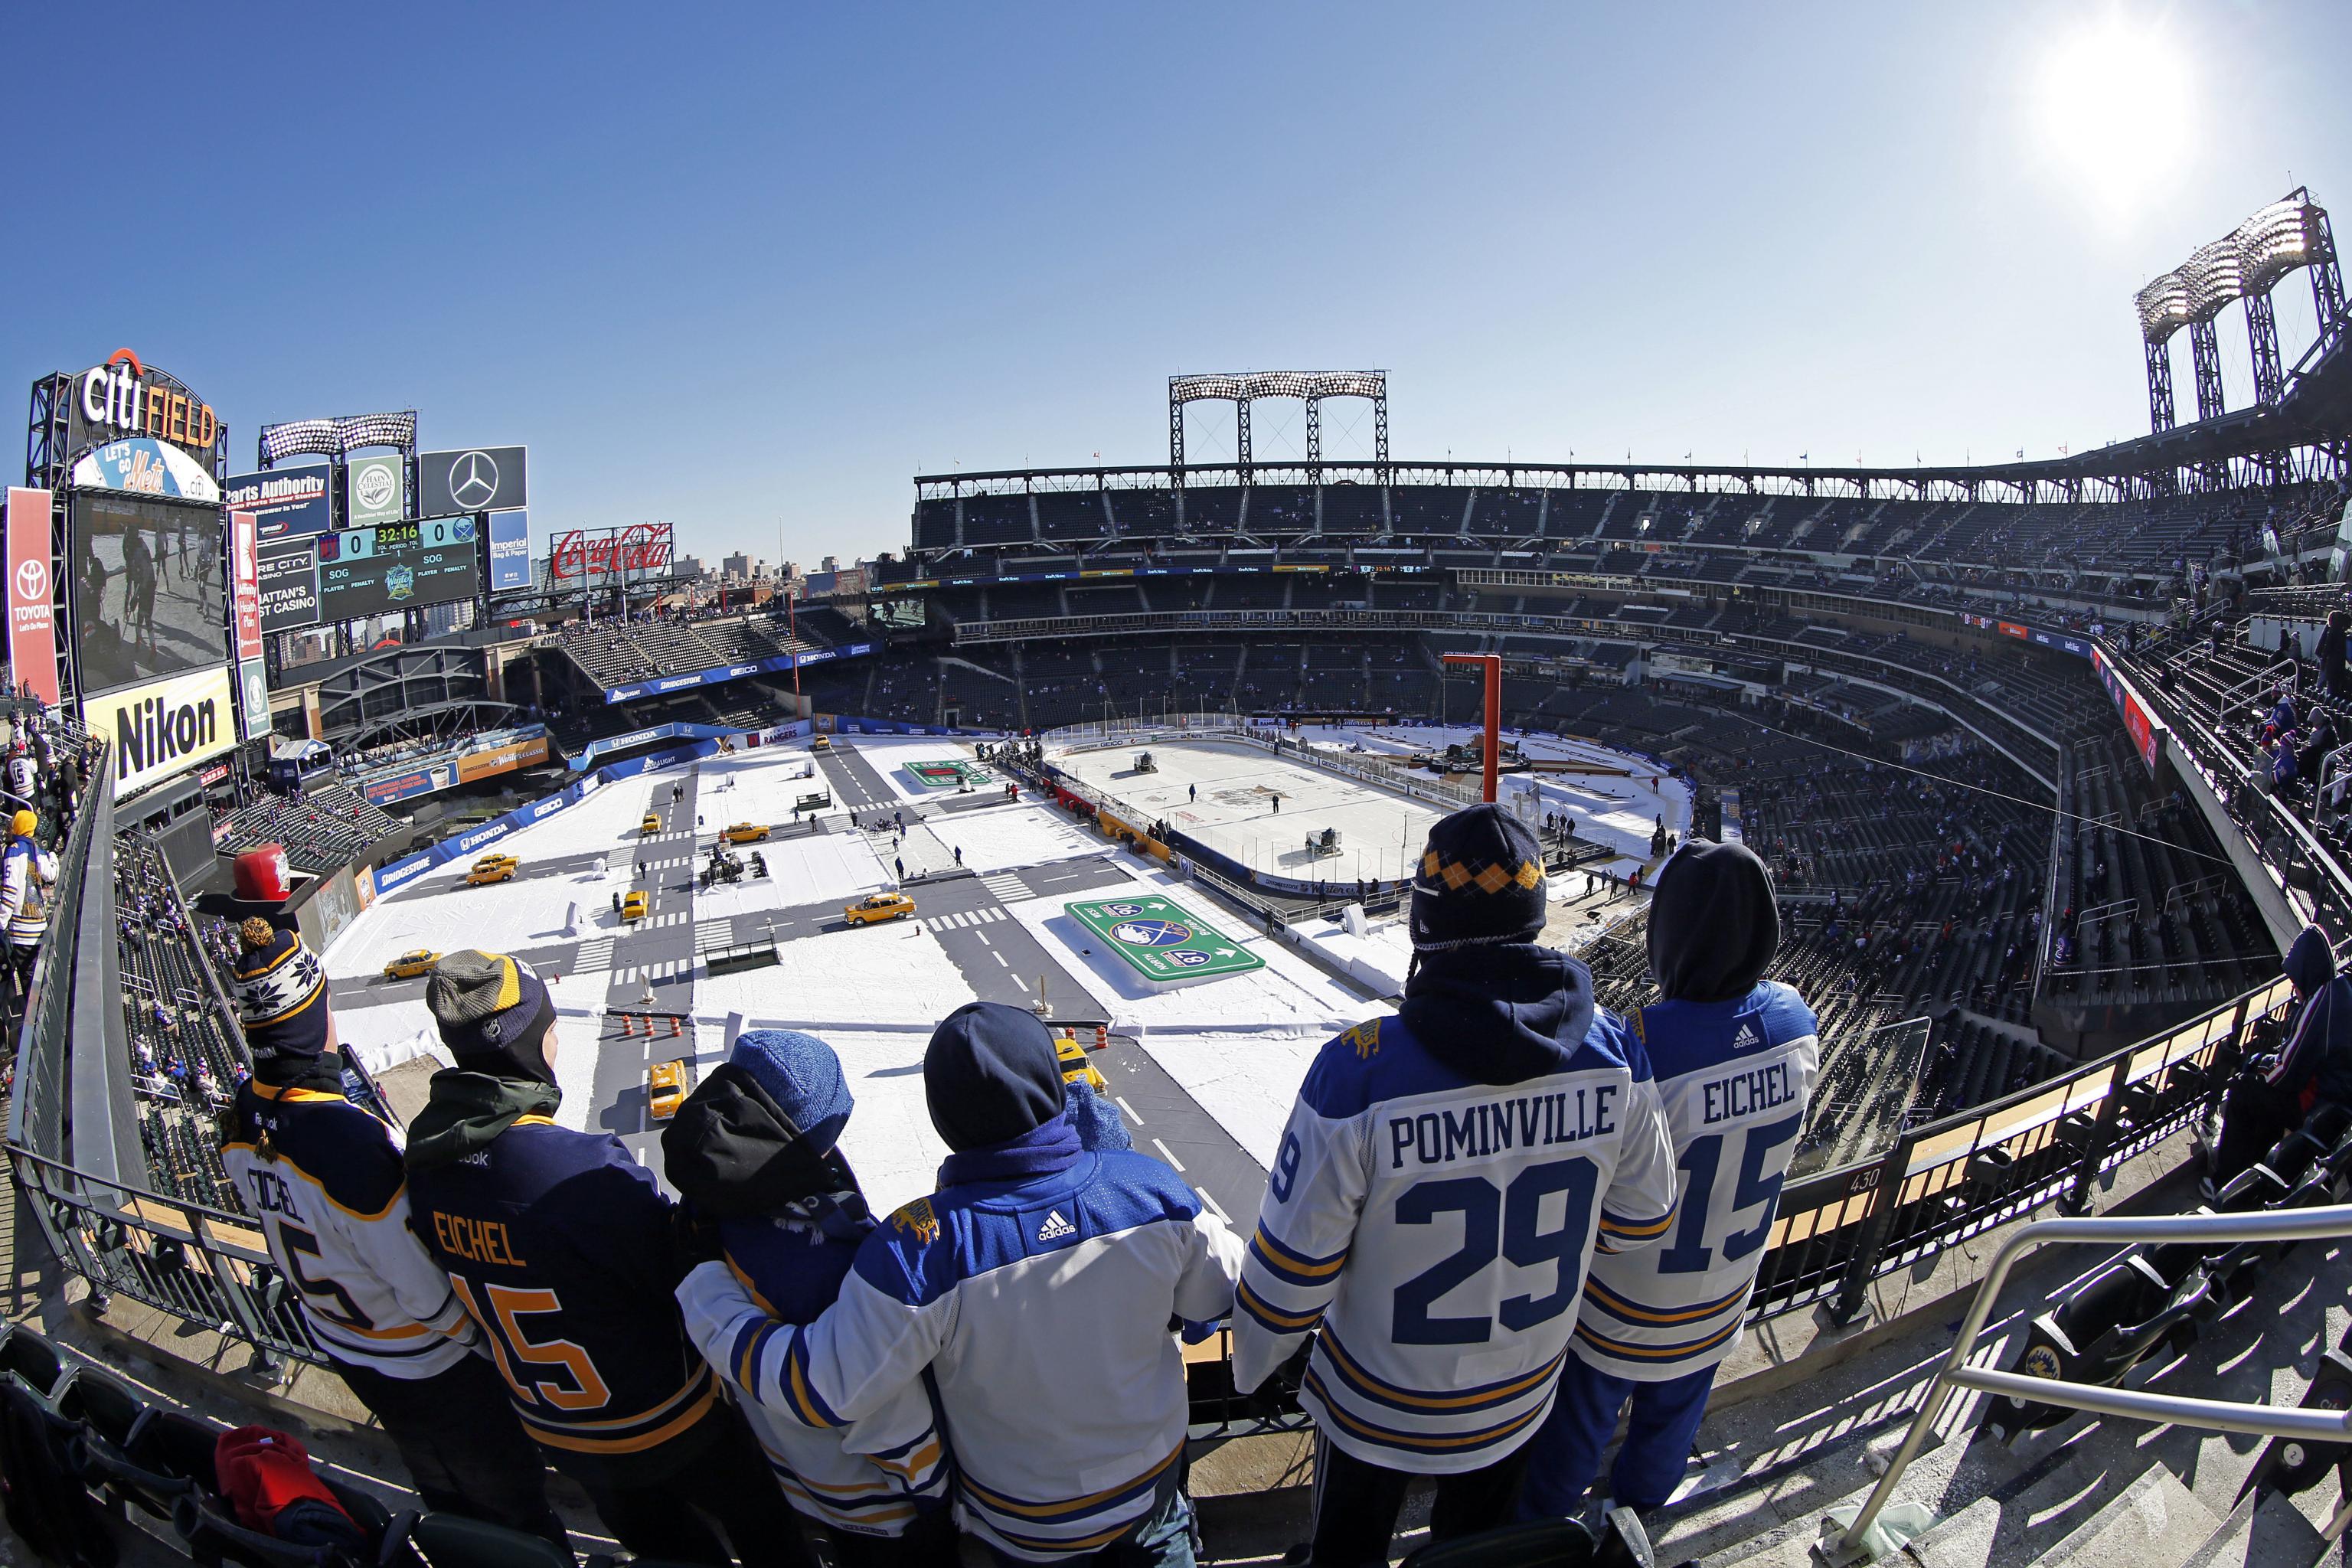 2018 Winter Classic: Final score and highlights for Rangers vs